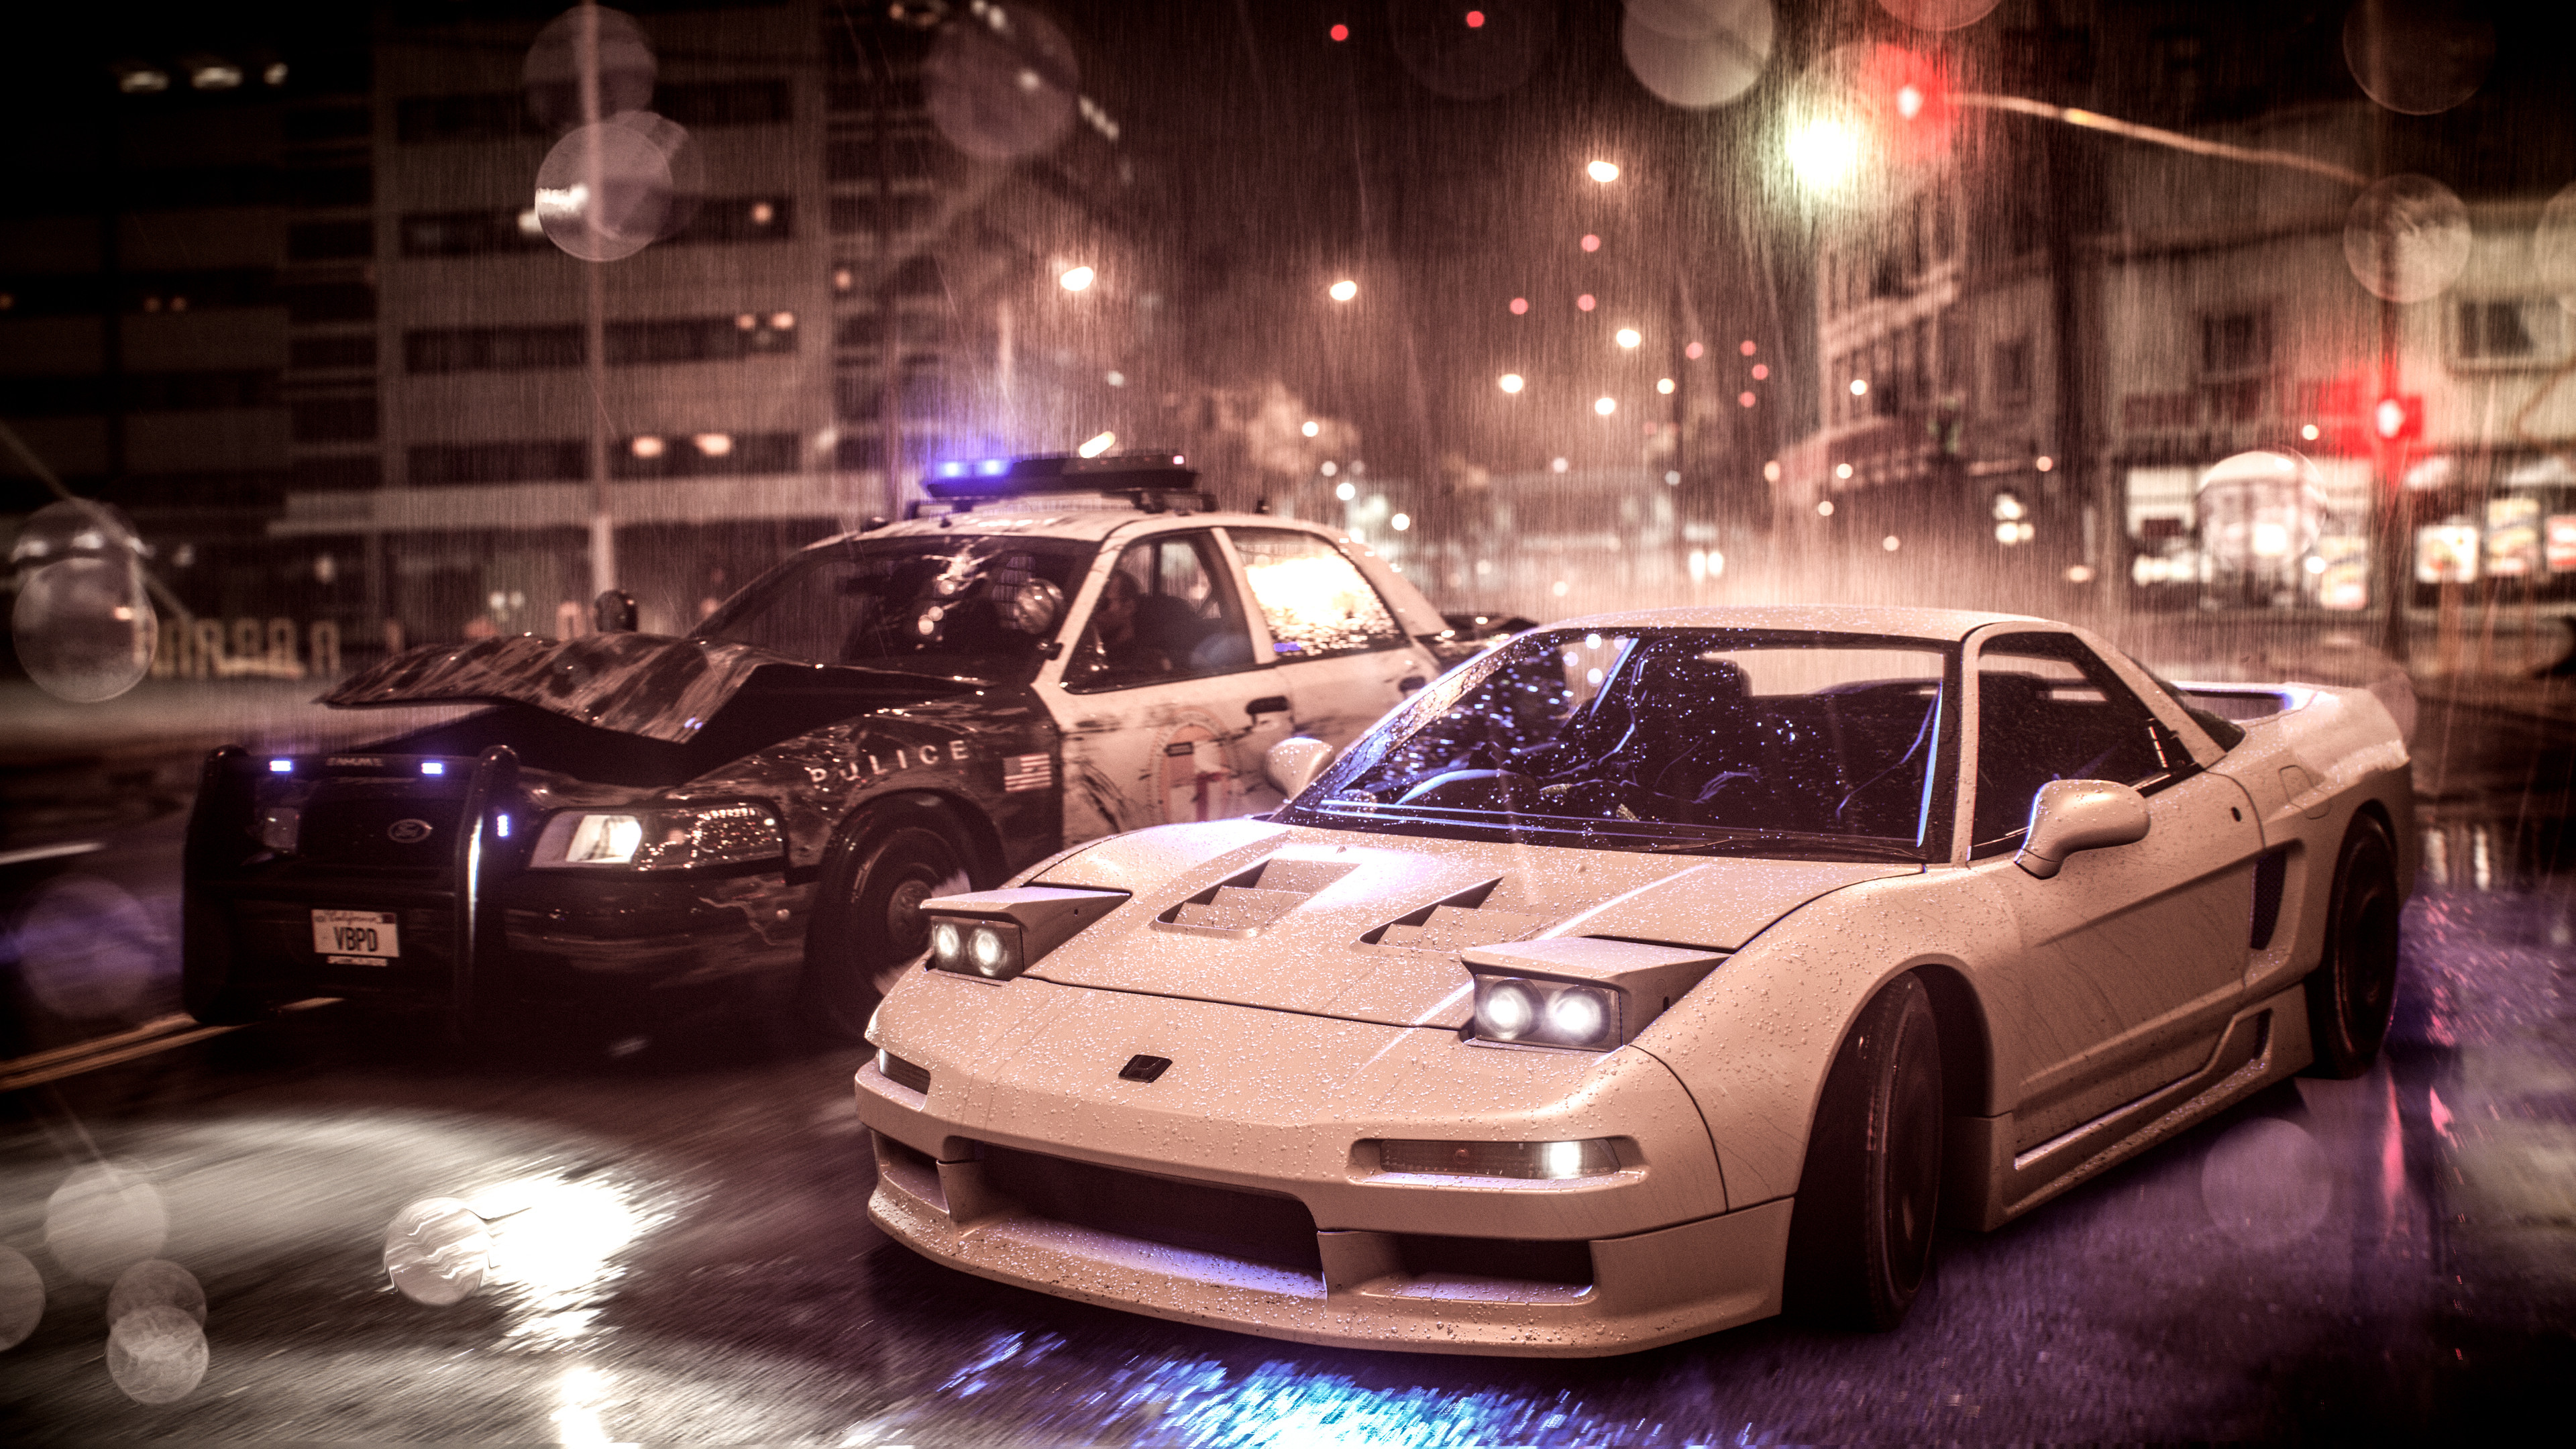 The Best and Most Comprehensive Need For Speed 2015 Wallpaper